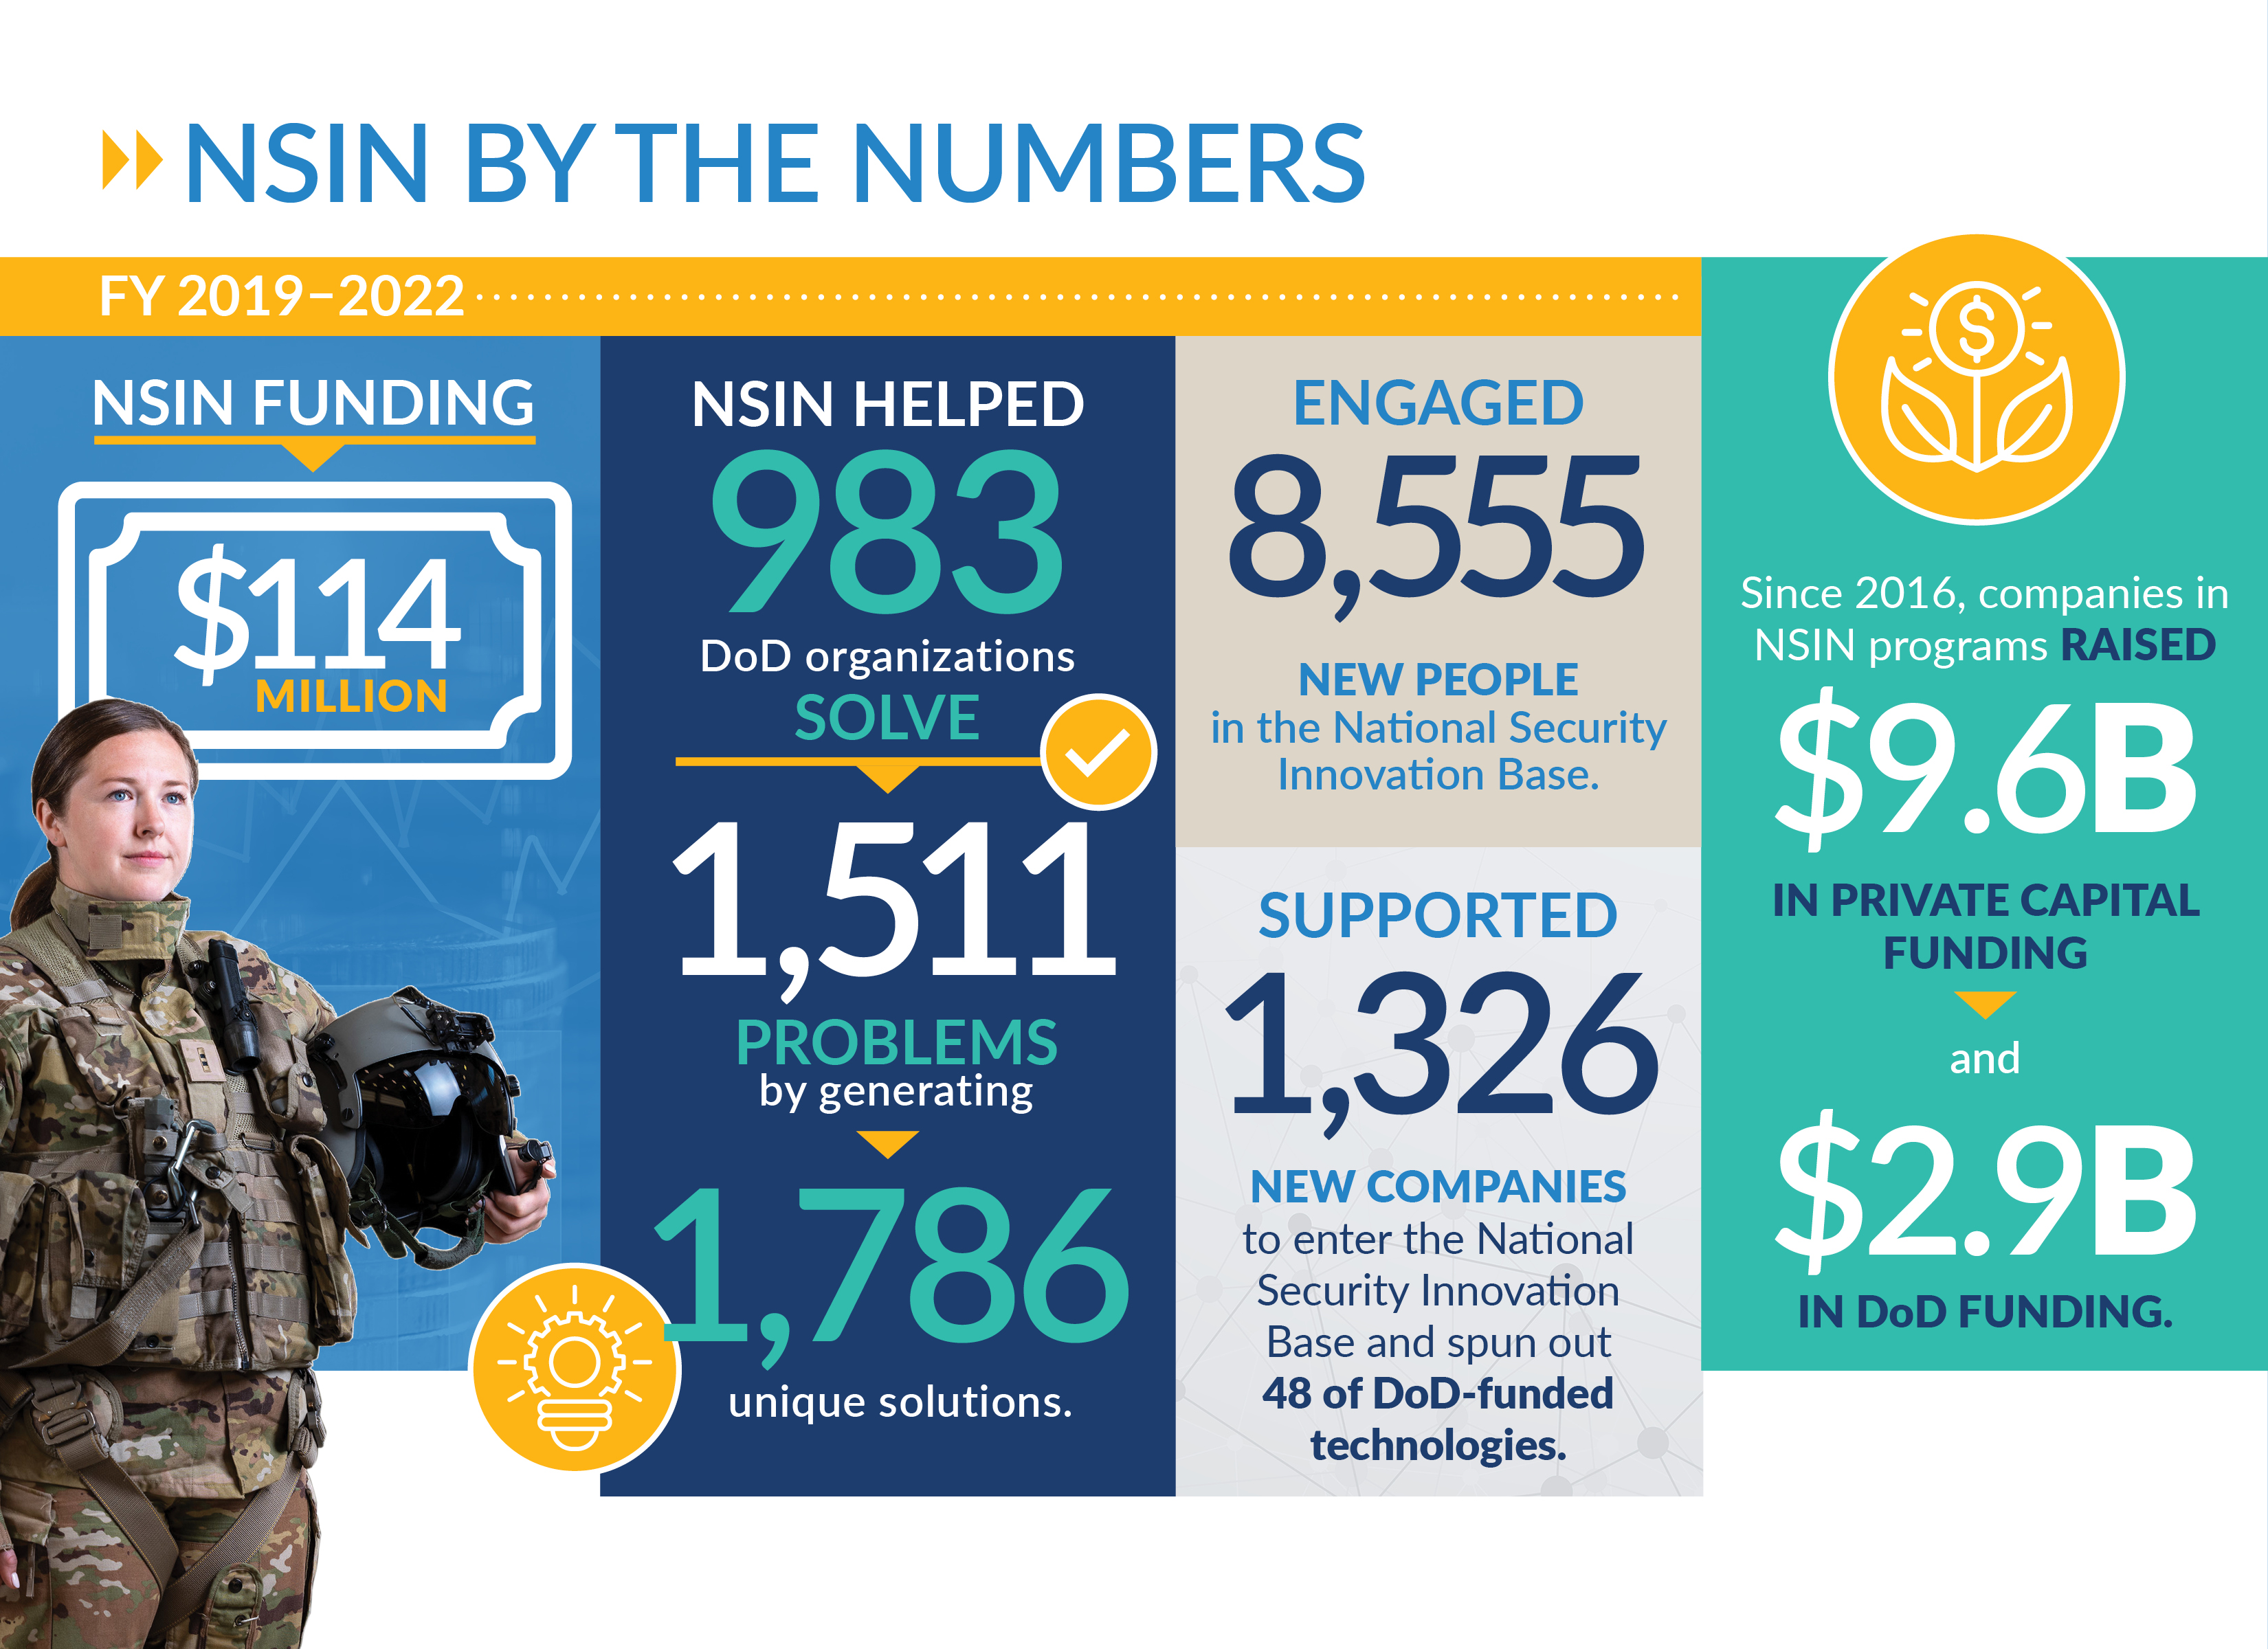 NSIN by the Numbers!